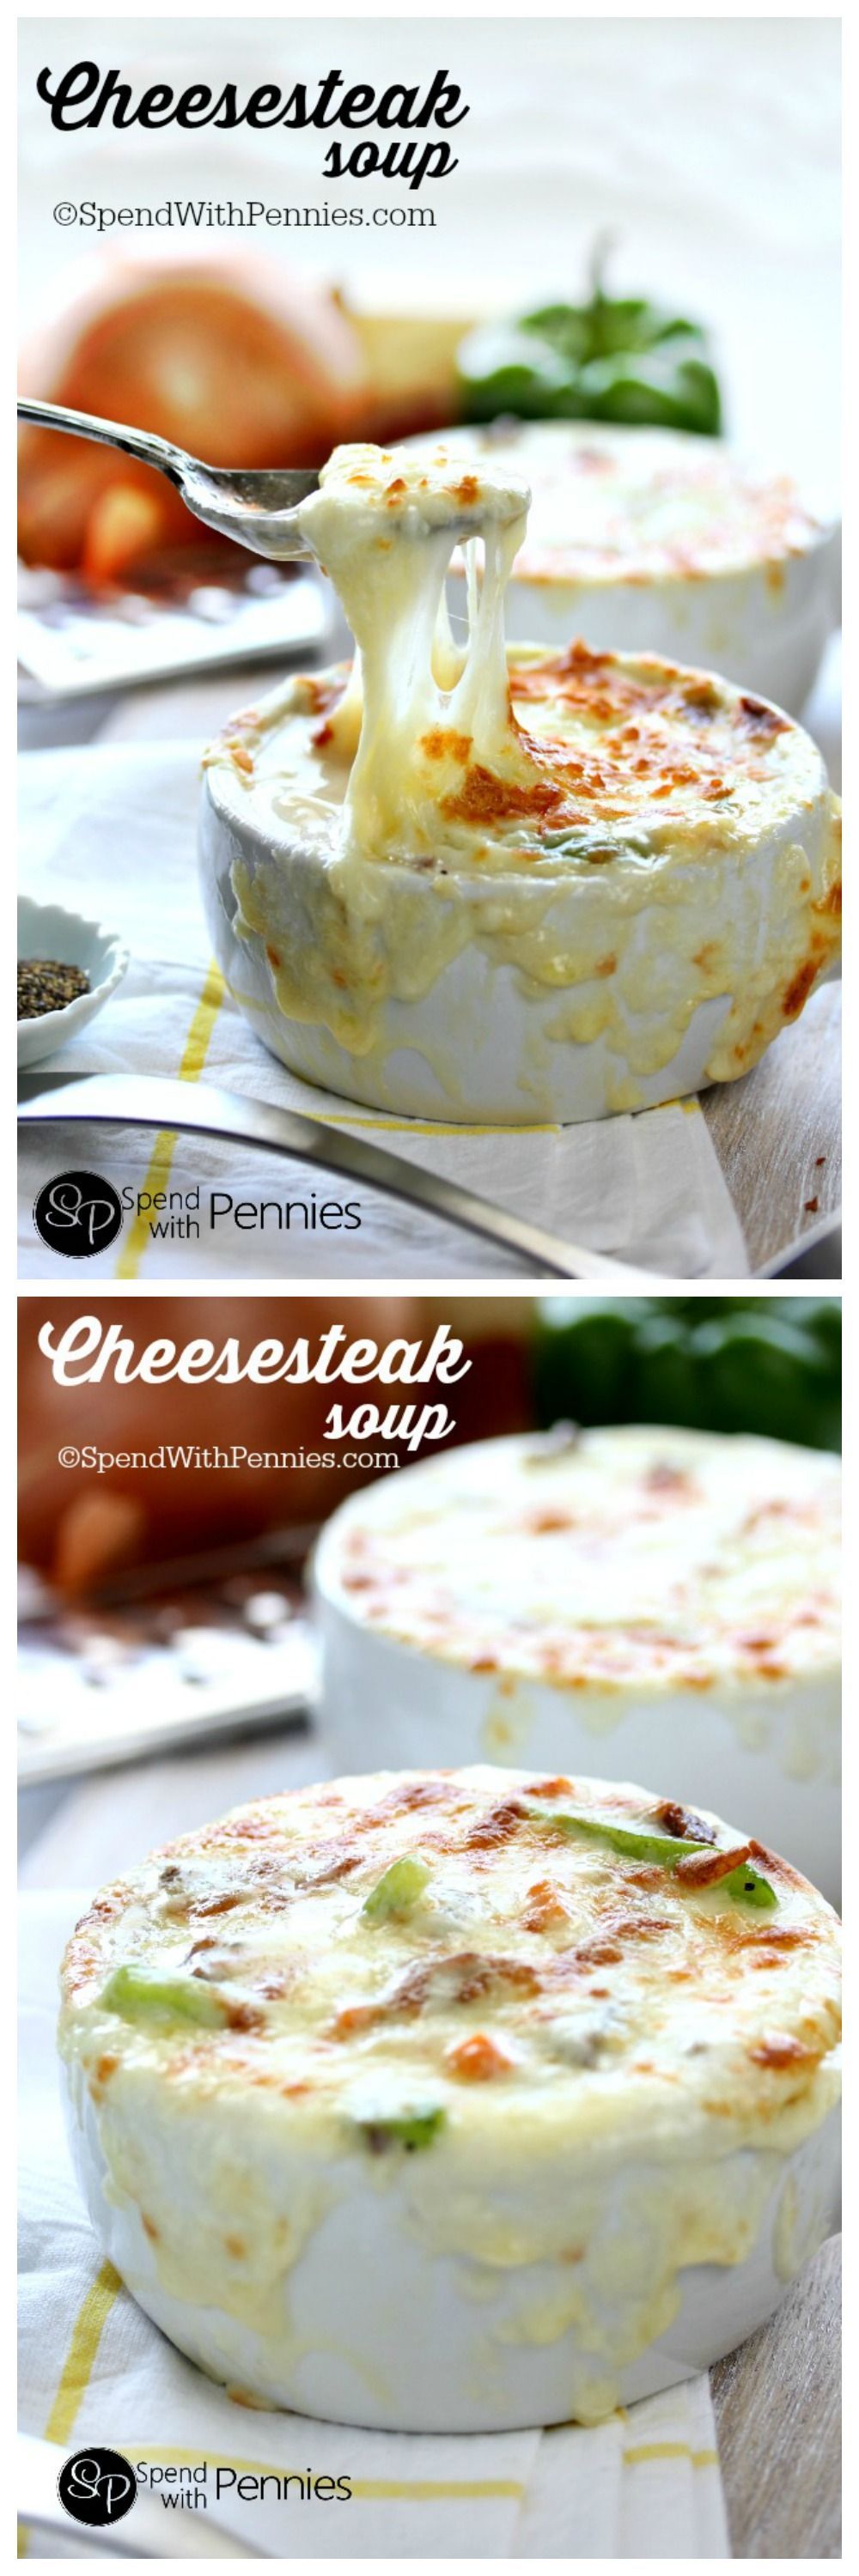 Baked Cheesesteak Soup! Loaded with beef, peppers and cheese this creamy cheesy soup recipe is a great